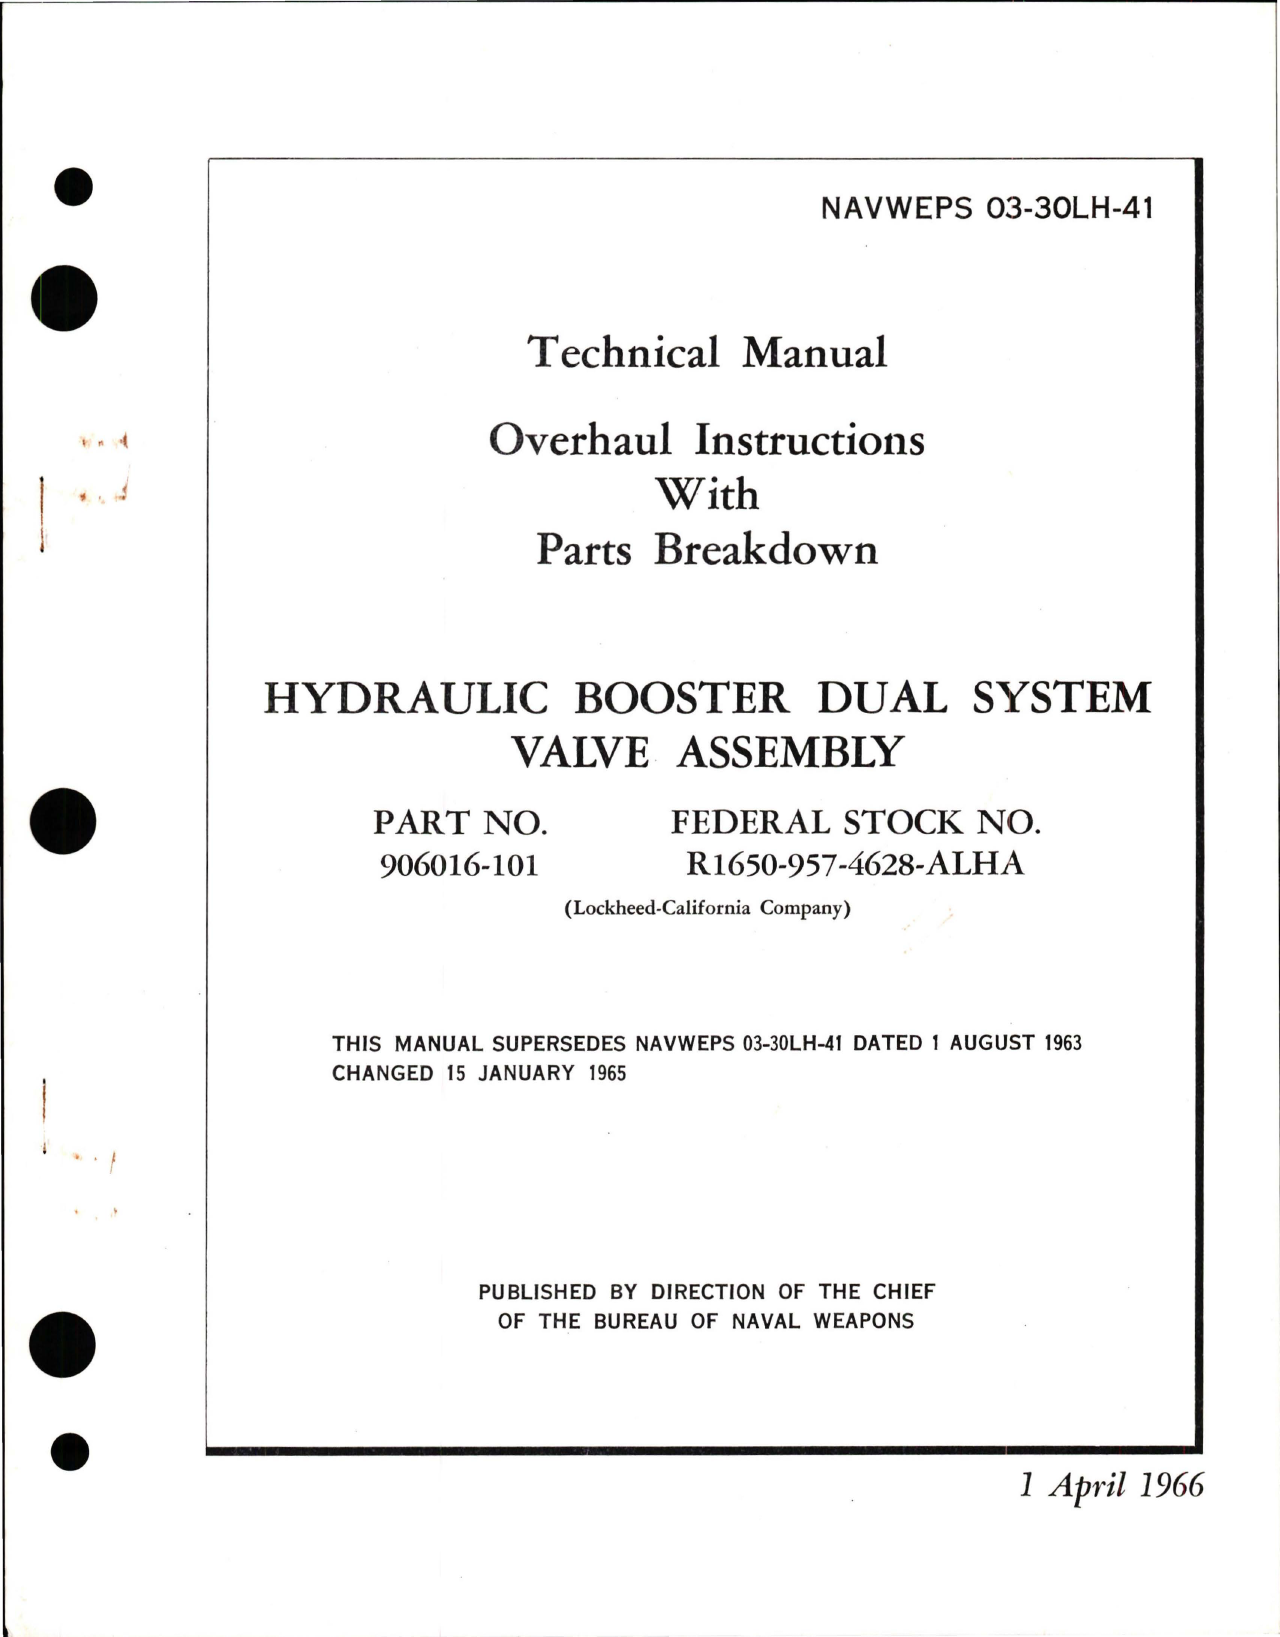 Sample page 1 from AirCorps Library document: Overhaul Instructions with Parts Breakdown for Hydraulic Booster Dual System Valve Assembly - Part 906016-101